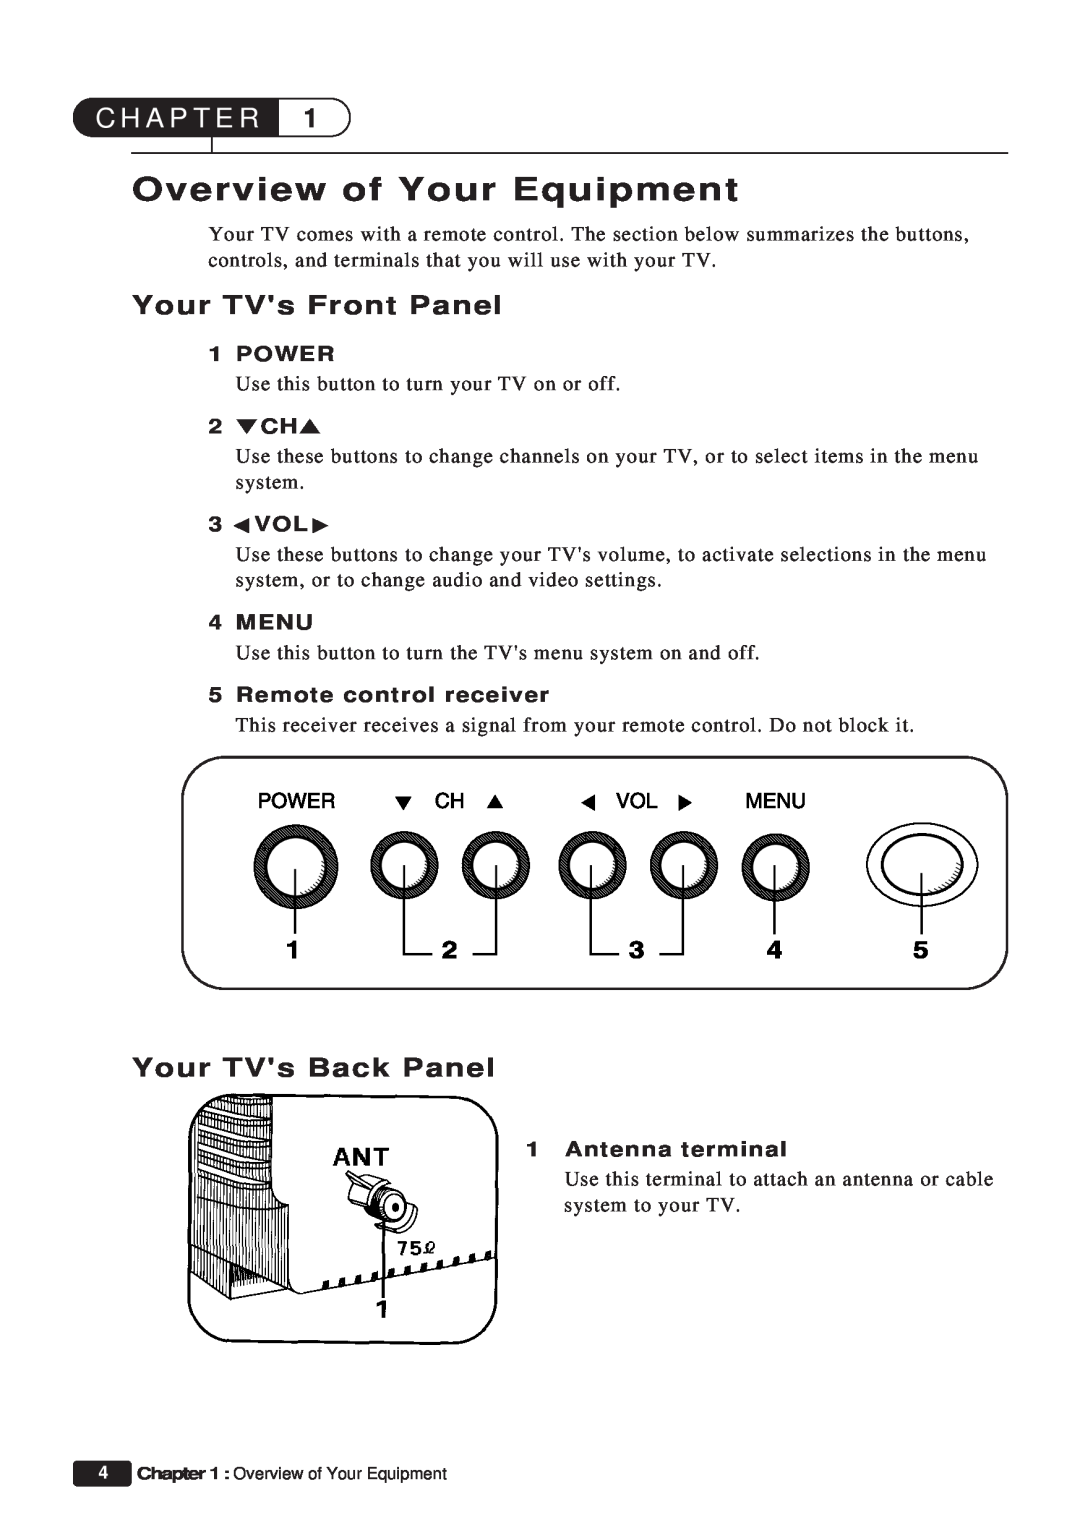 Daewoo ET 13P2 Overview of Your Equipment, C H A P T E R, Your TVs Front Panel, Your TVs Back Panel, Power, Cvolb, Menu 